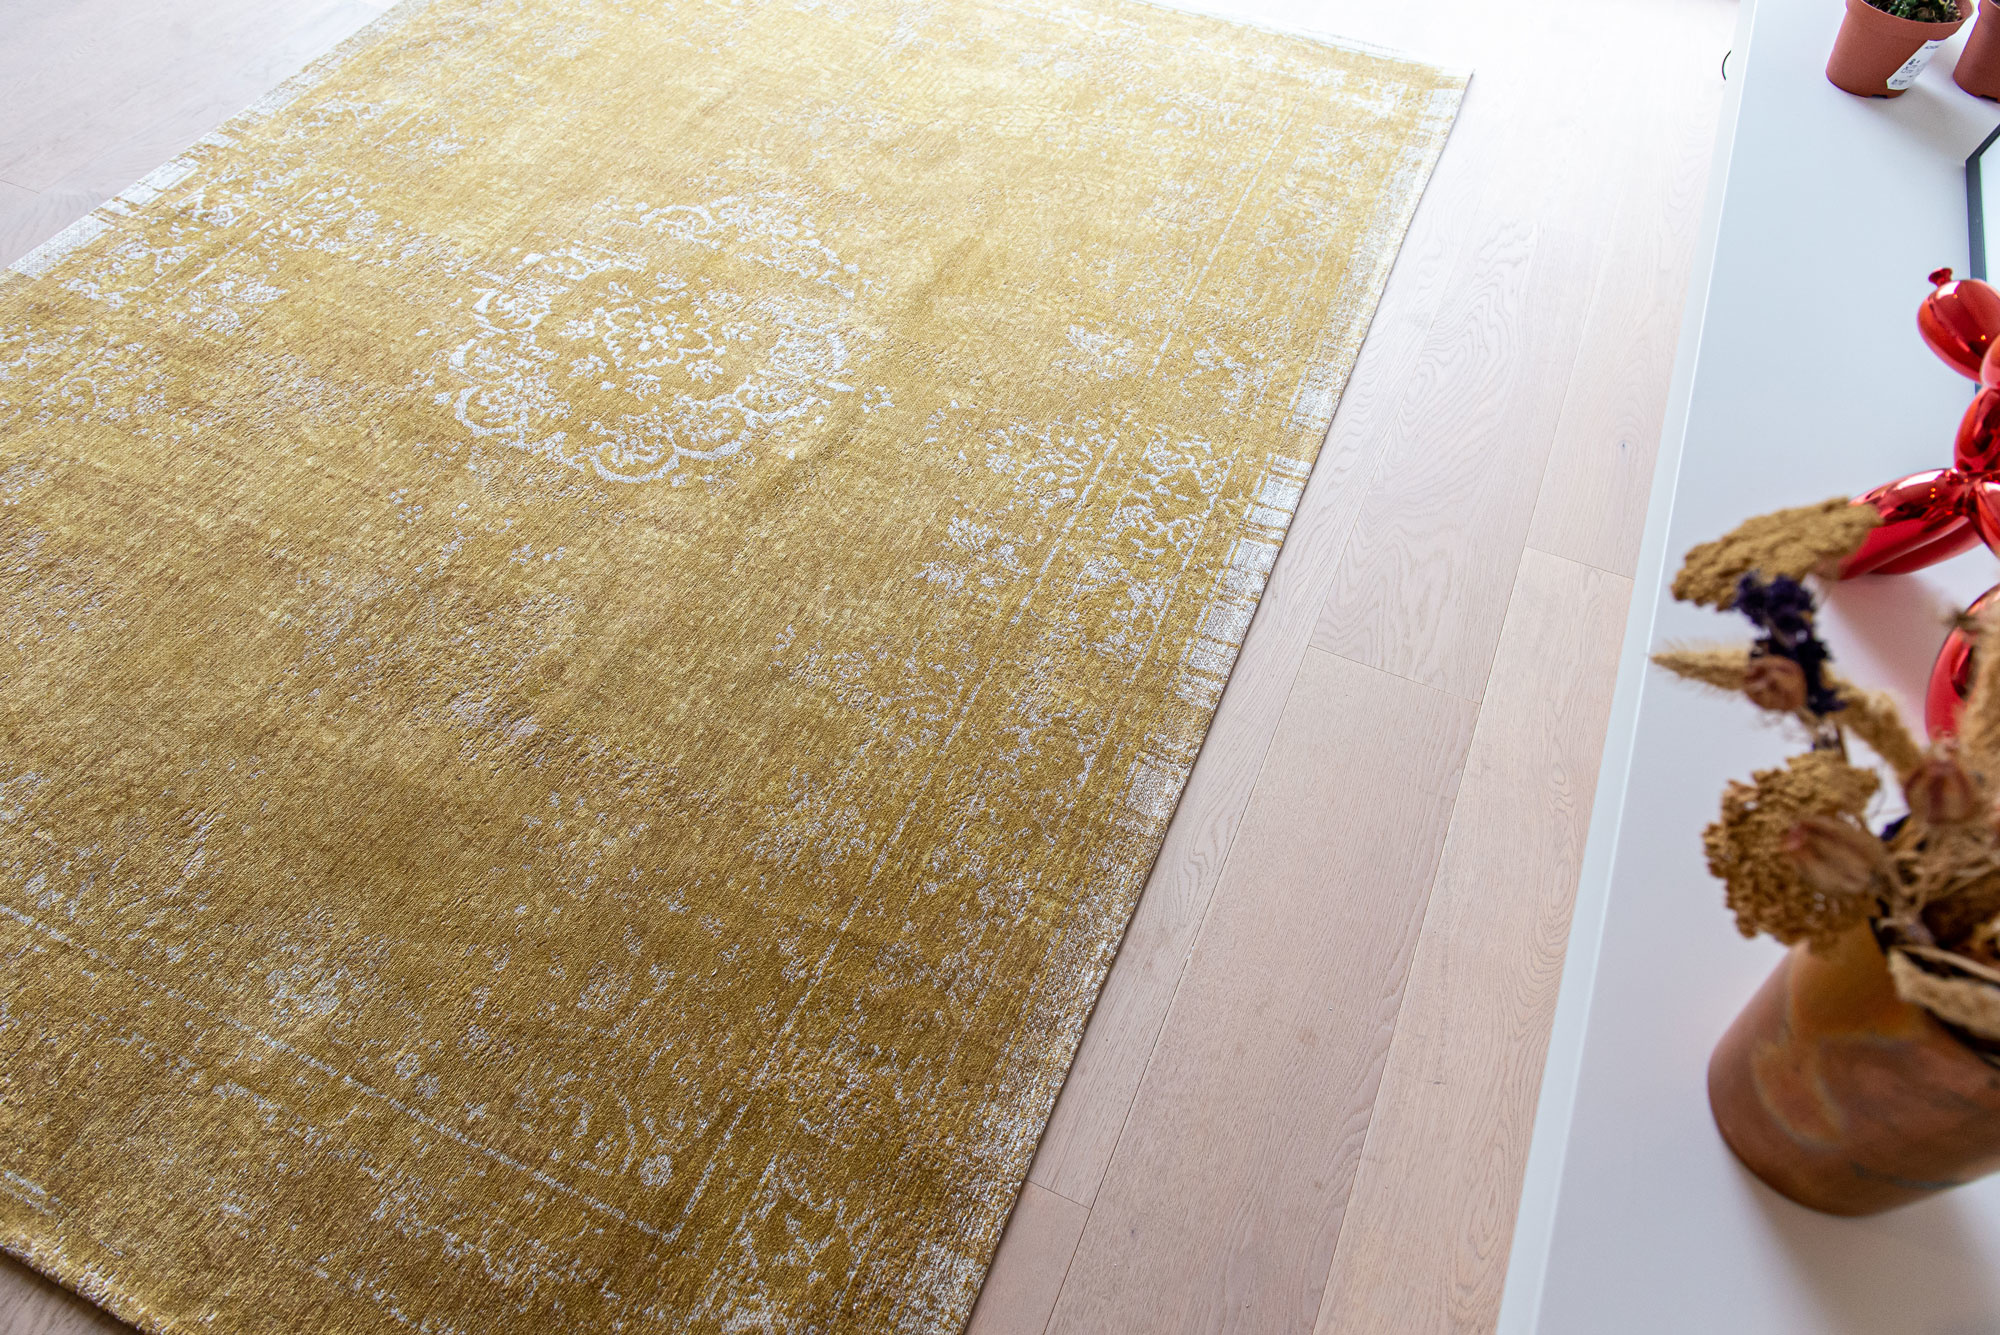 Spring Moss 9145 Rug ☞ Size: 280 x 390 cm